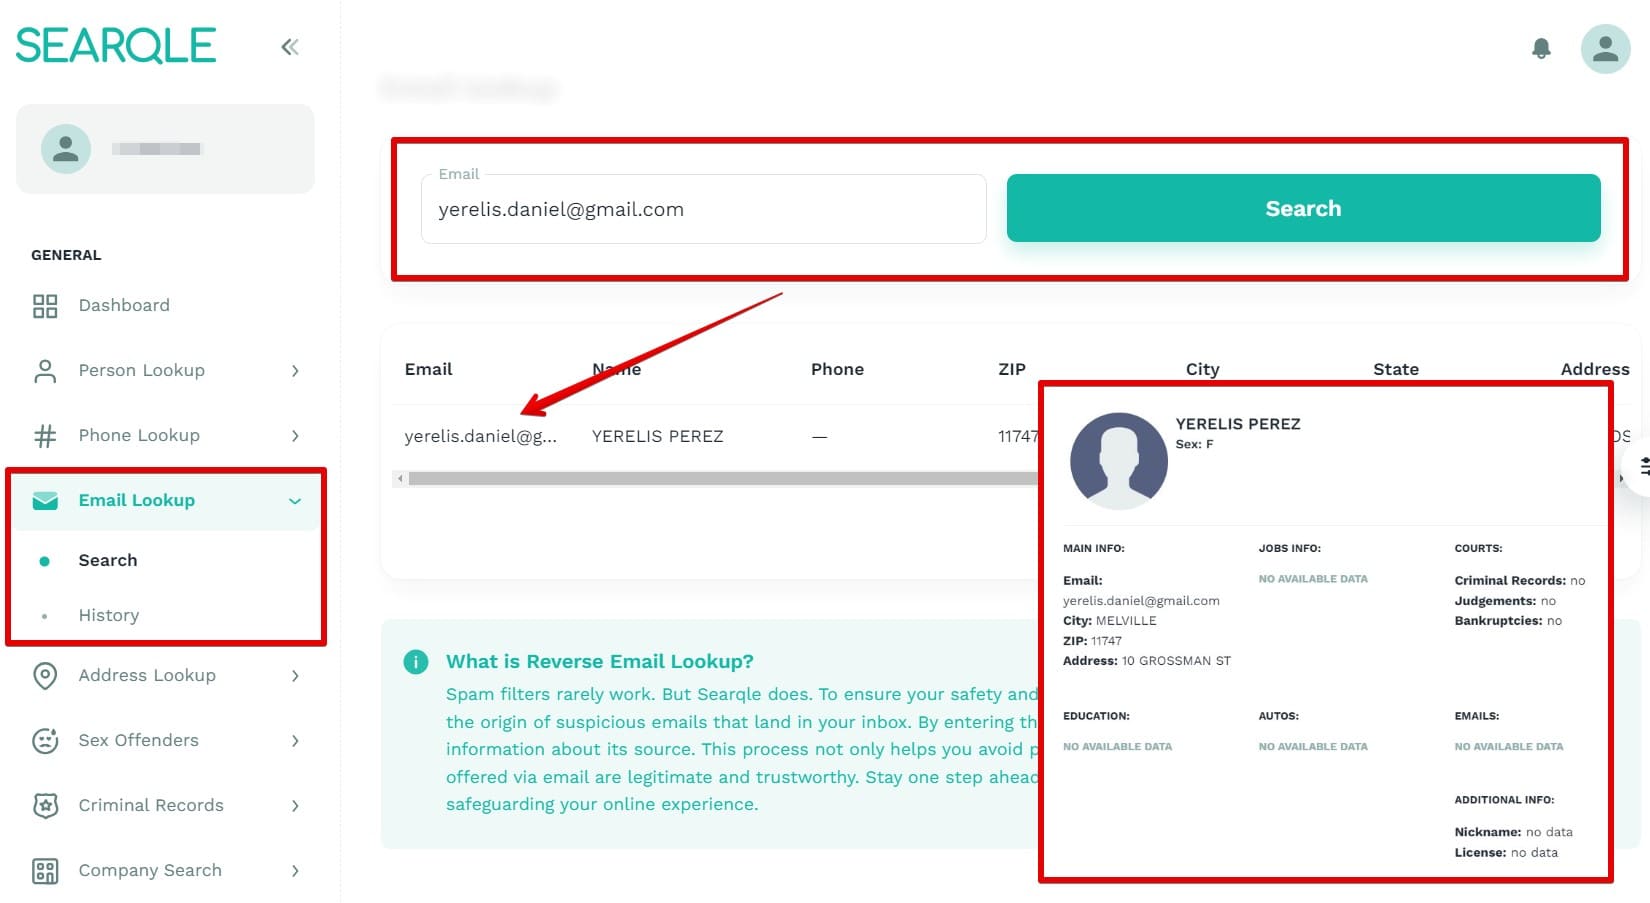 Image showing how to find a person by e-mail address on Searqle and what data will be visible in a search